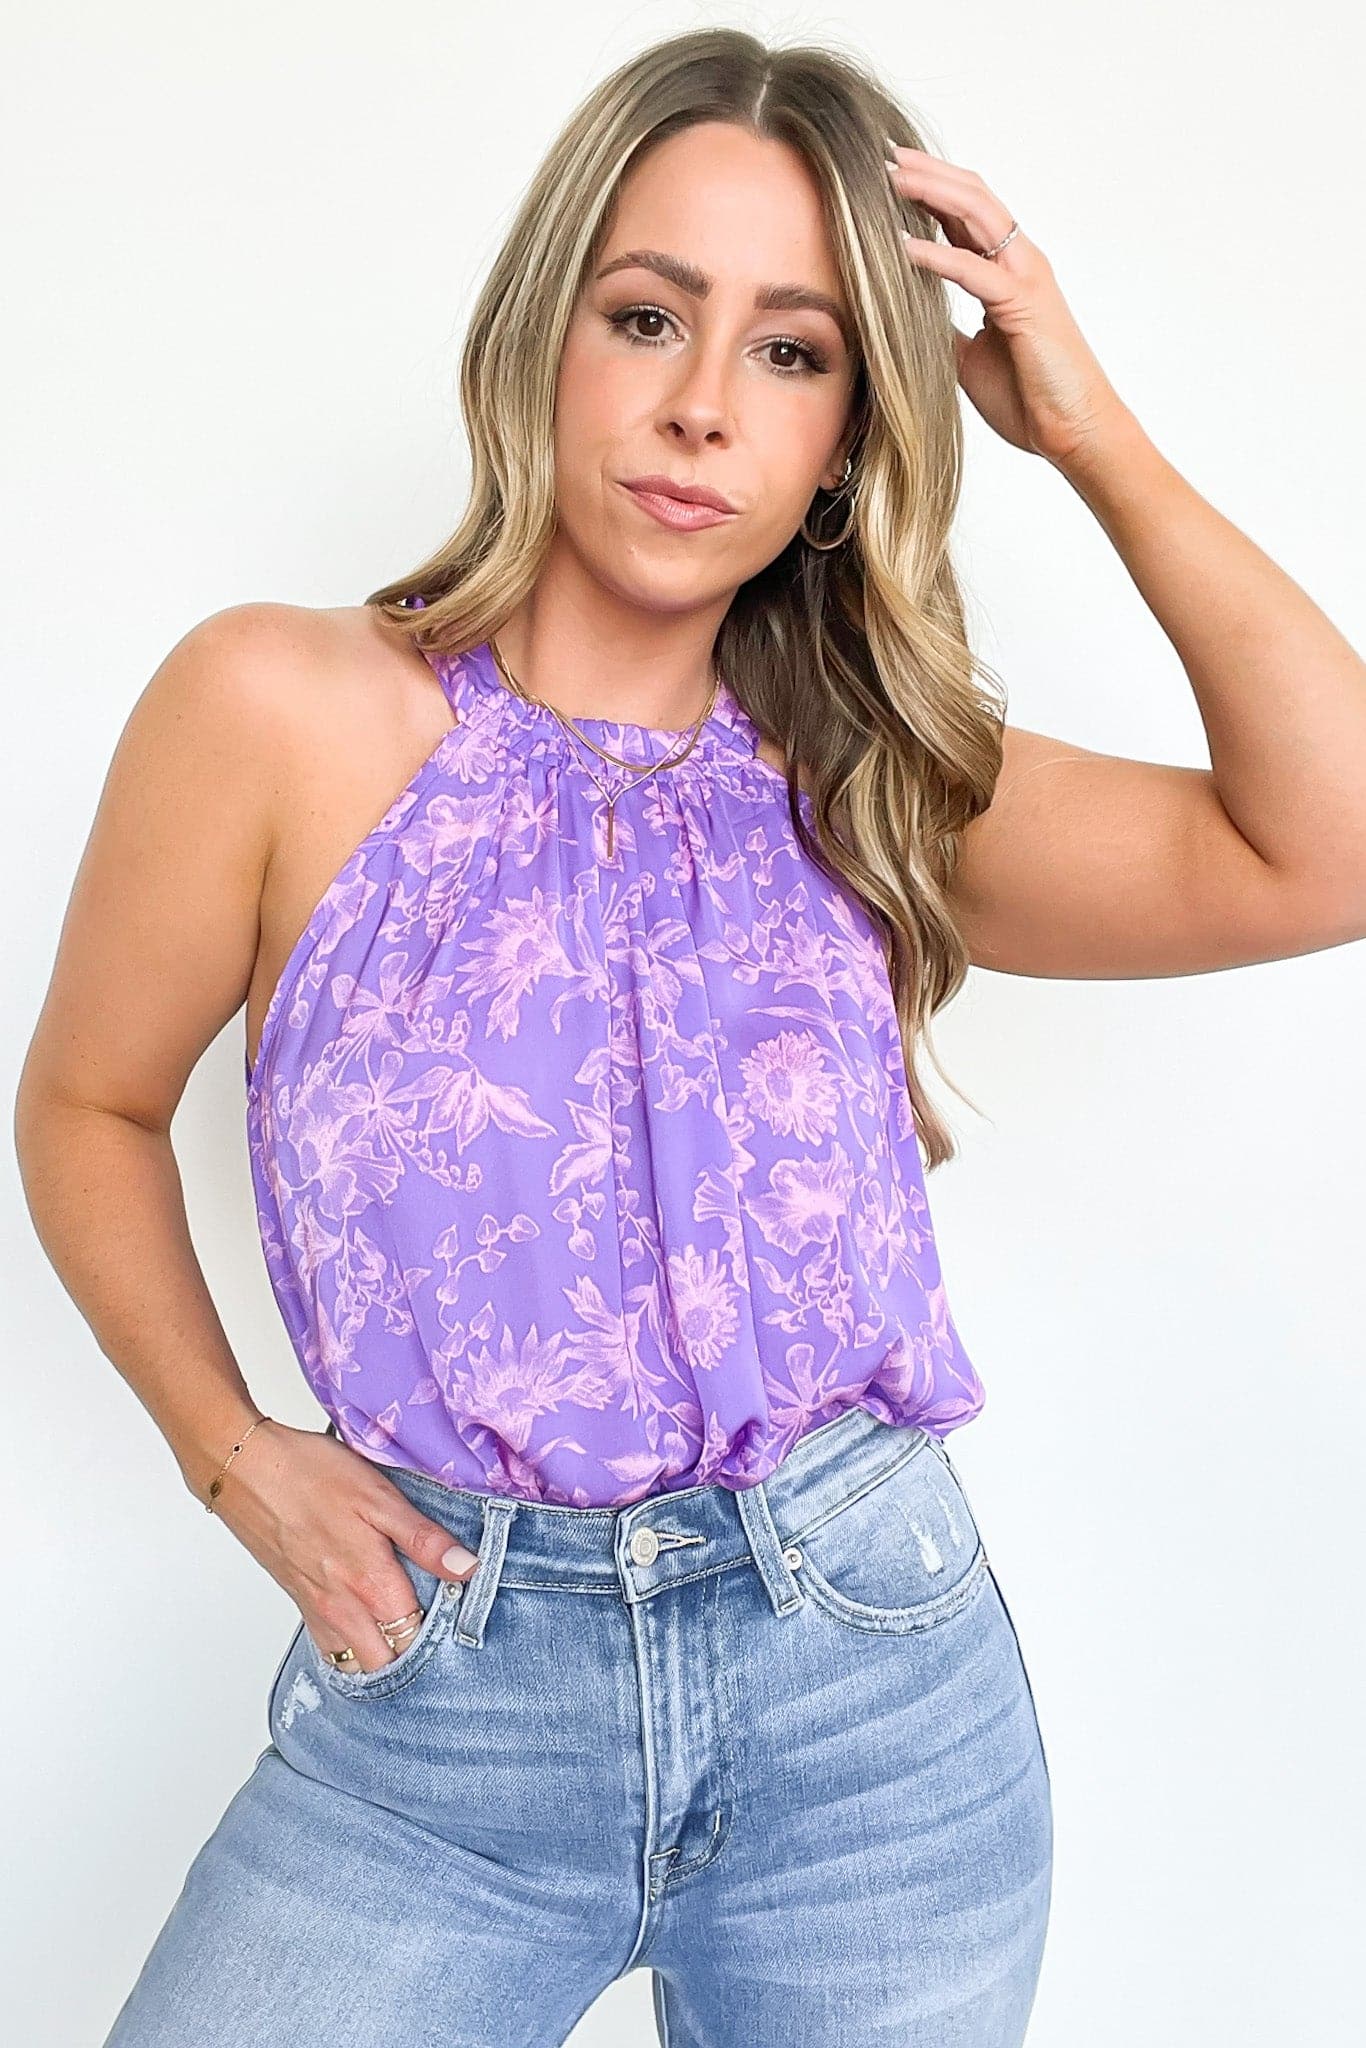  Whimsical Wishes Floral Smocked Top - FINAL SALE - Madison and Mallory